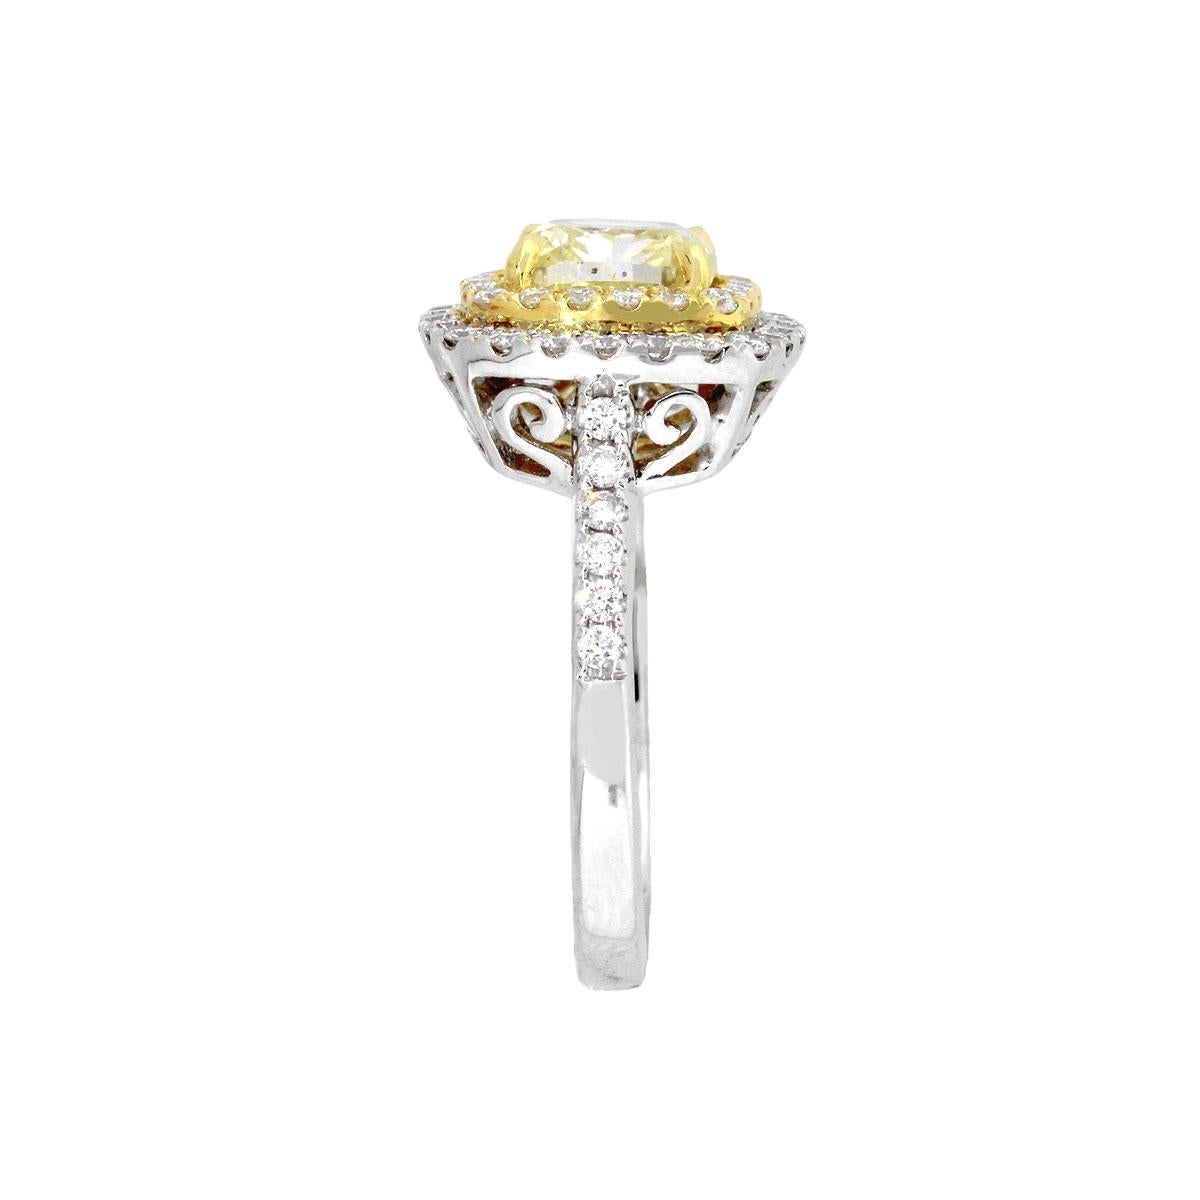 Material: 18k White Gold/18k Yellow Gold
Center Diamond Details: 1.71ct cushion cut diamond. Diamond is Fancy Intense Yellow in color and SI1 in clarity. GIA #2151124785
Accent Diamond Details: Approx. 0.60ctw of round brilliant diamonds. Diamonds